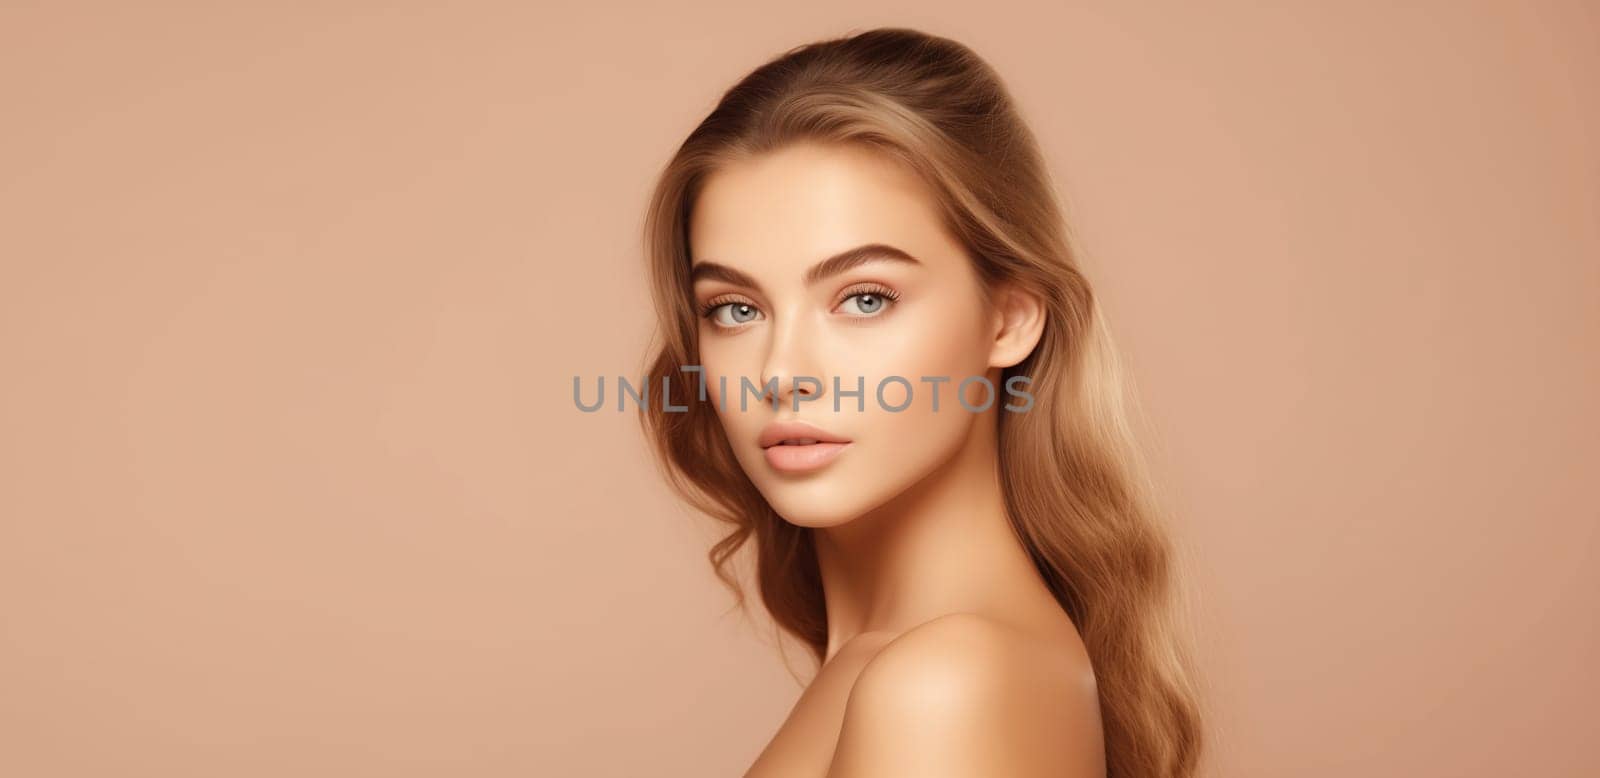 Beauty portrait of pretty young woman with healthy skin, beautiful lovely model posing on beige studio background